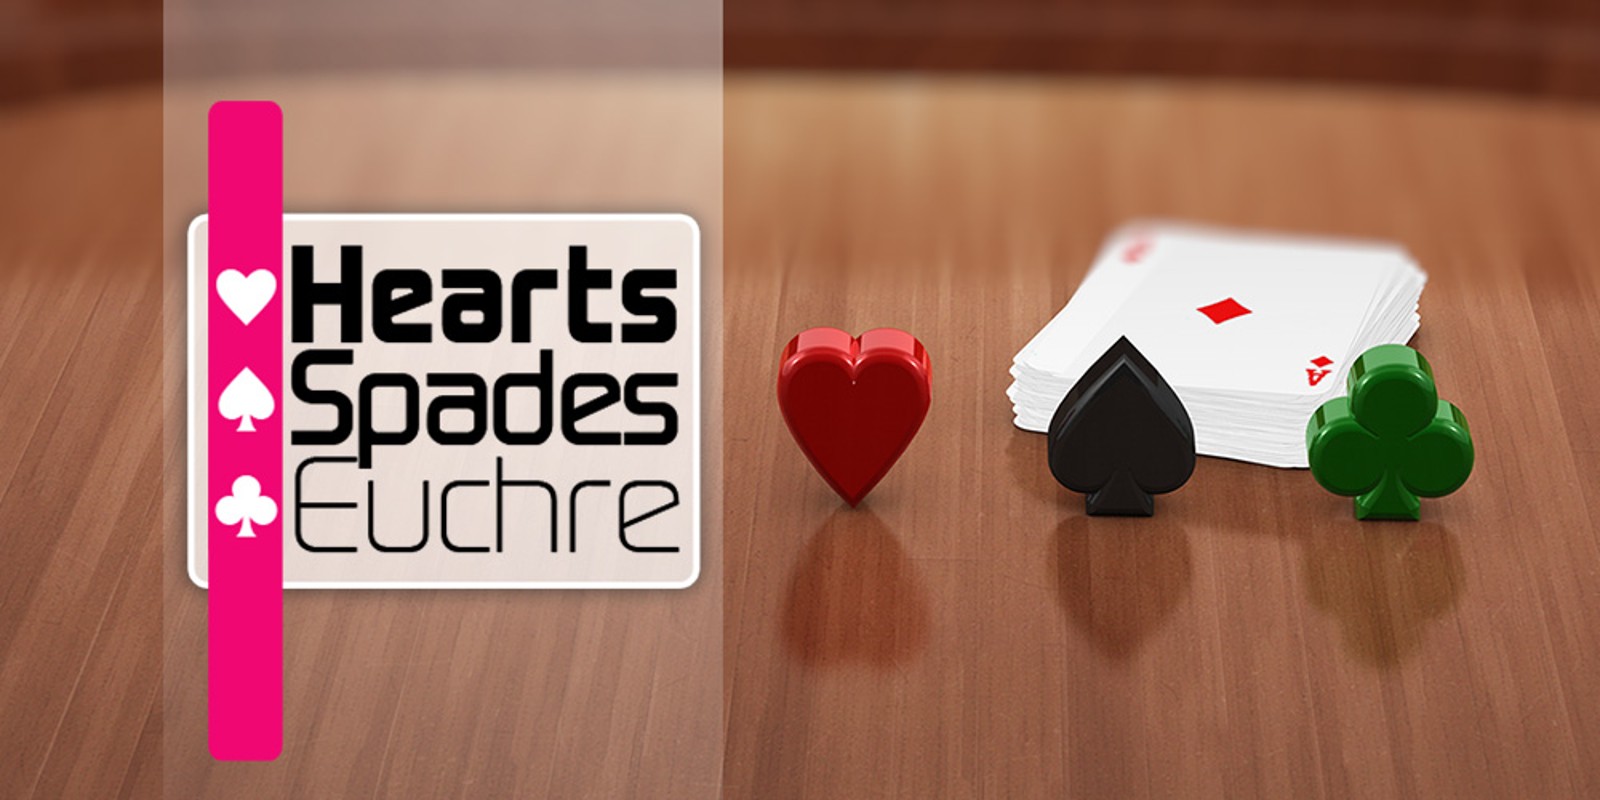 rules of hearts card game